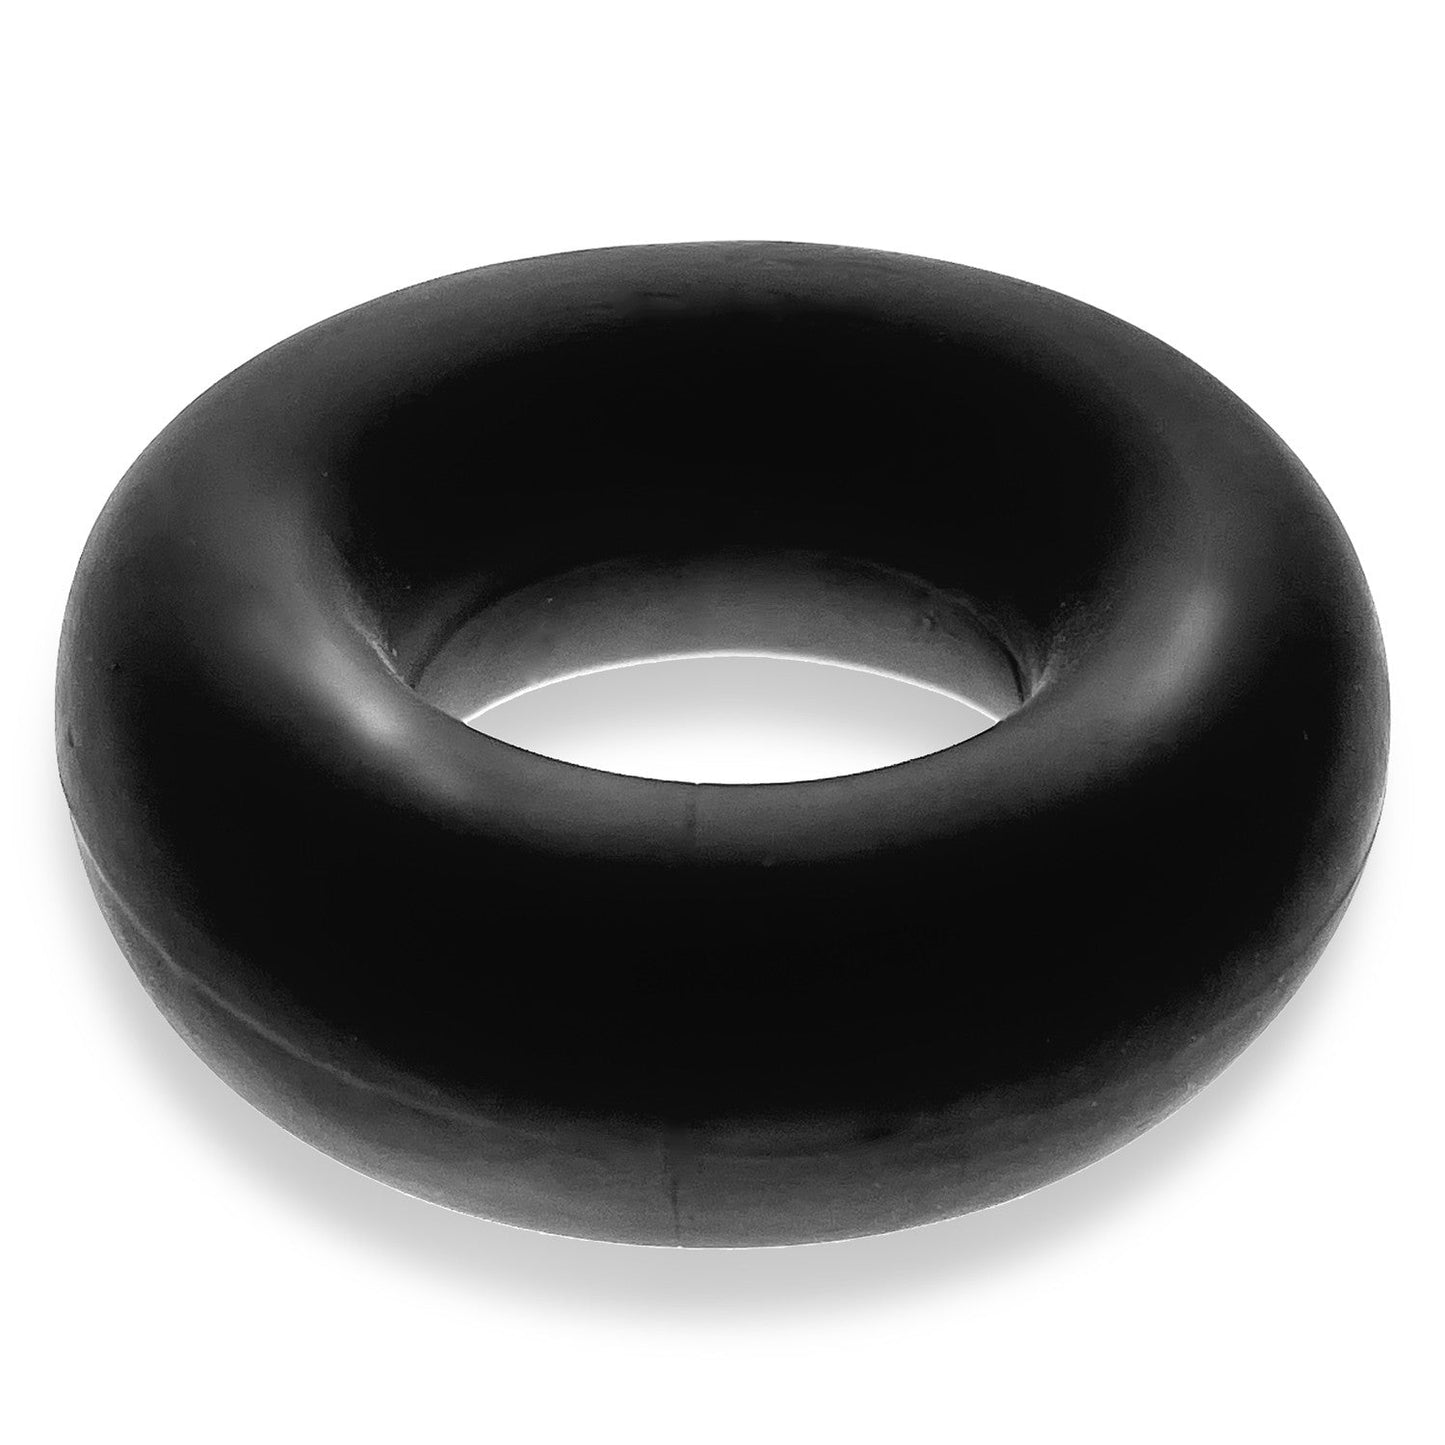 Oxballs FAT WILLY, 3-pack jumbo cockrings - BLACK